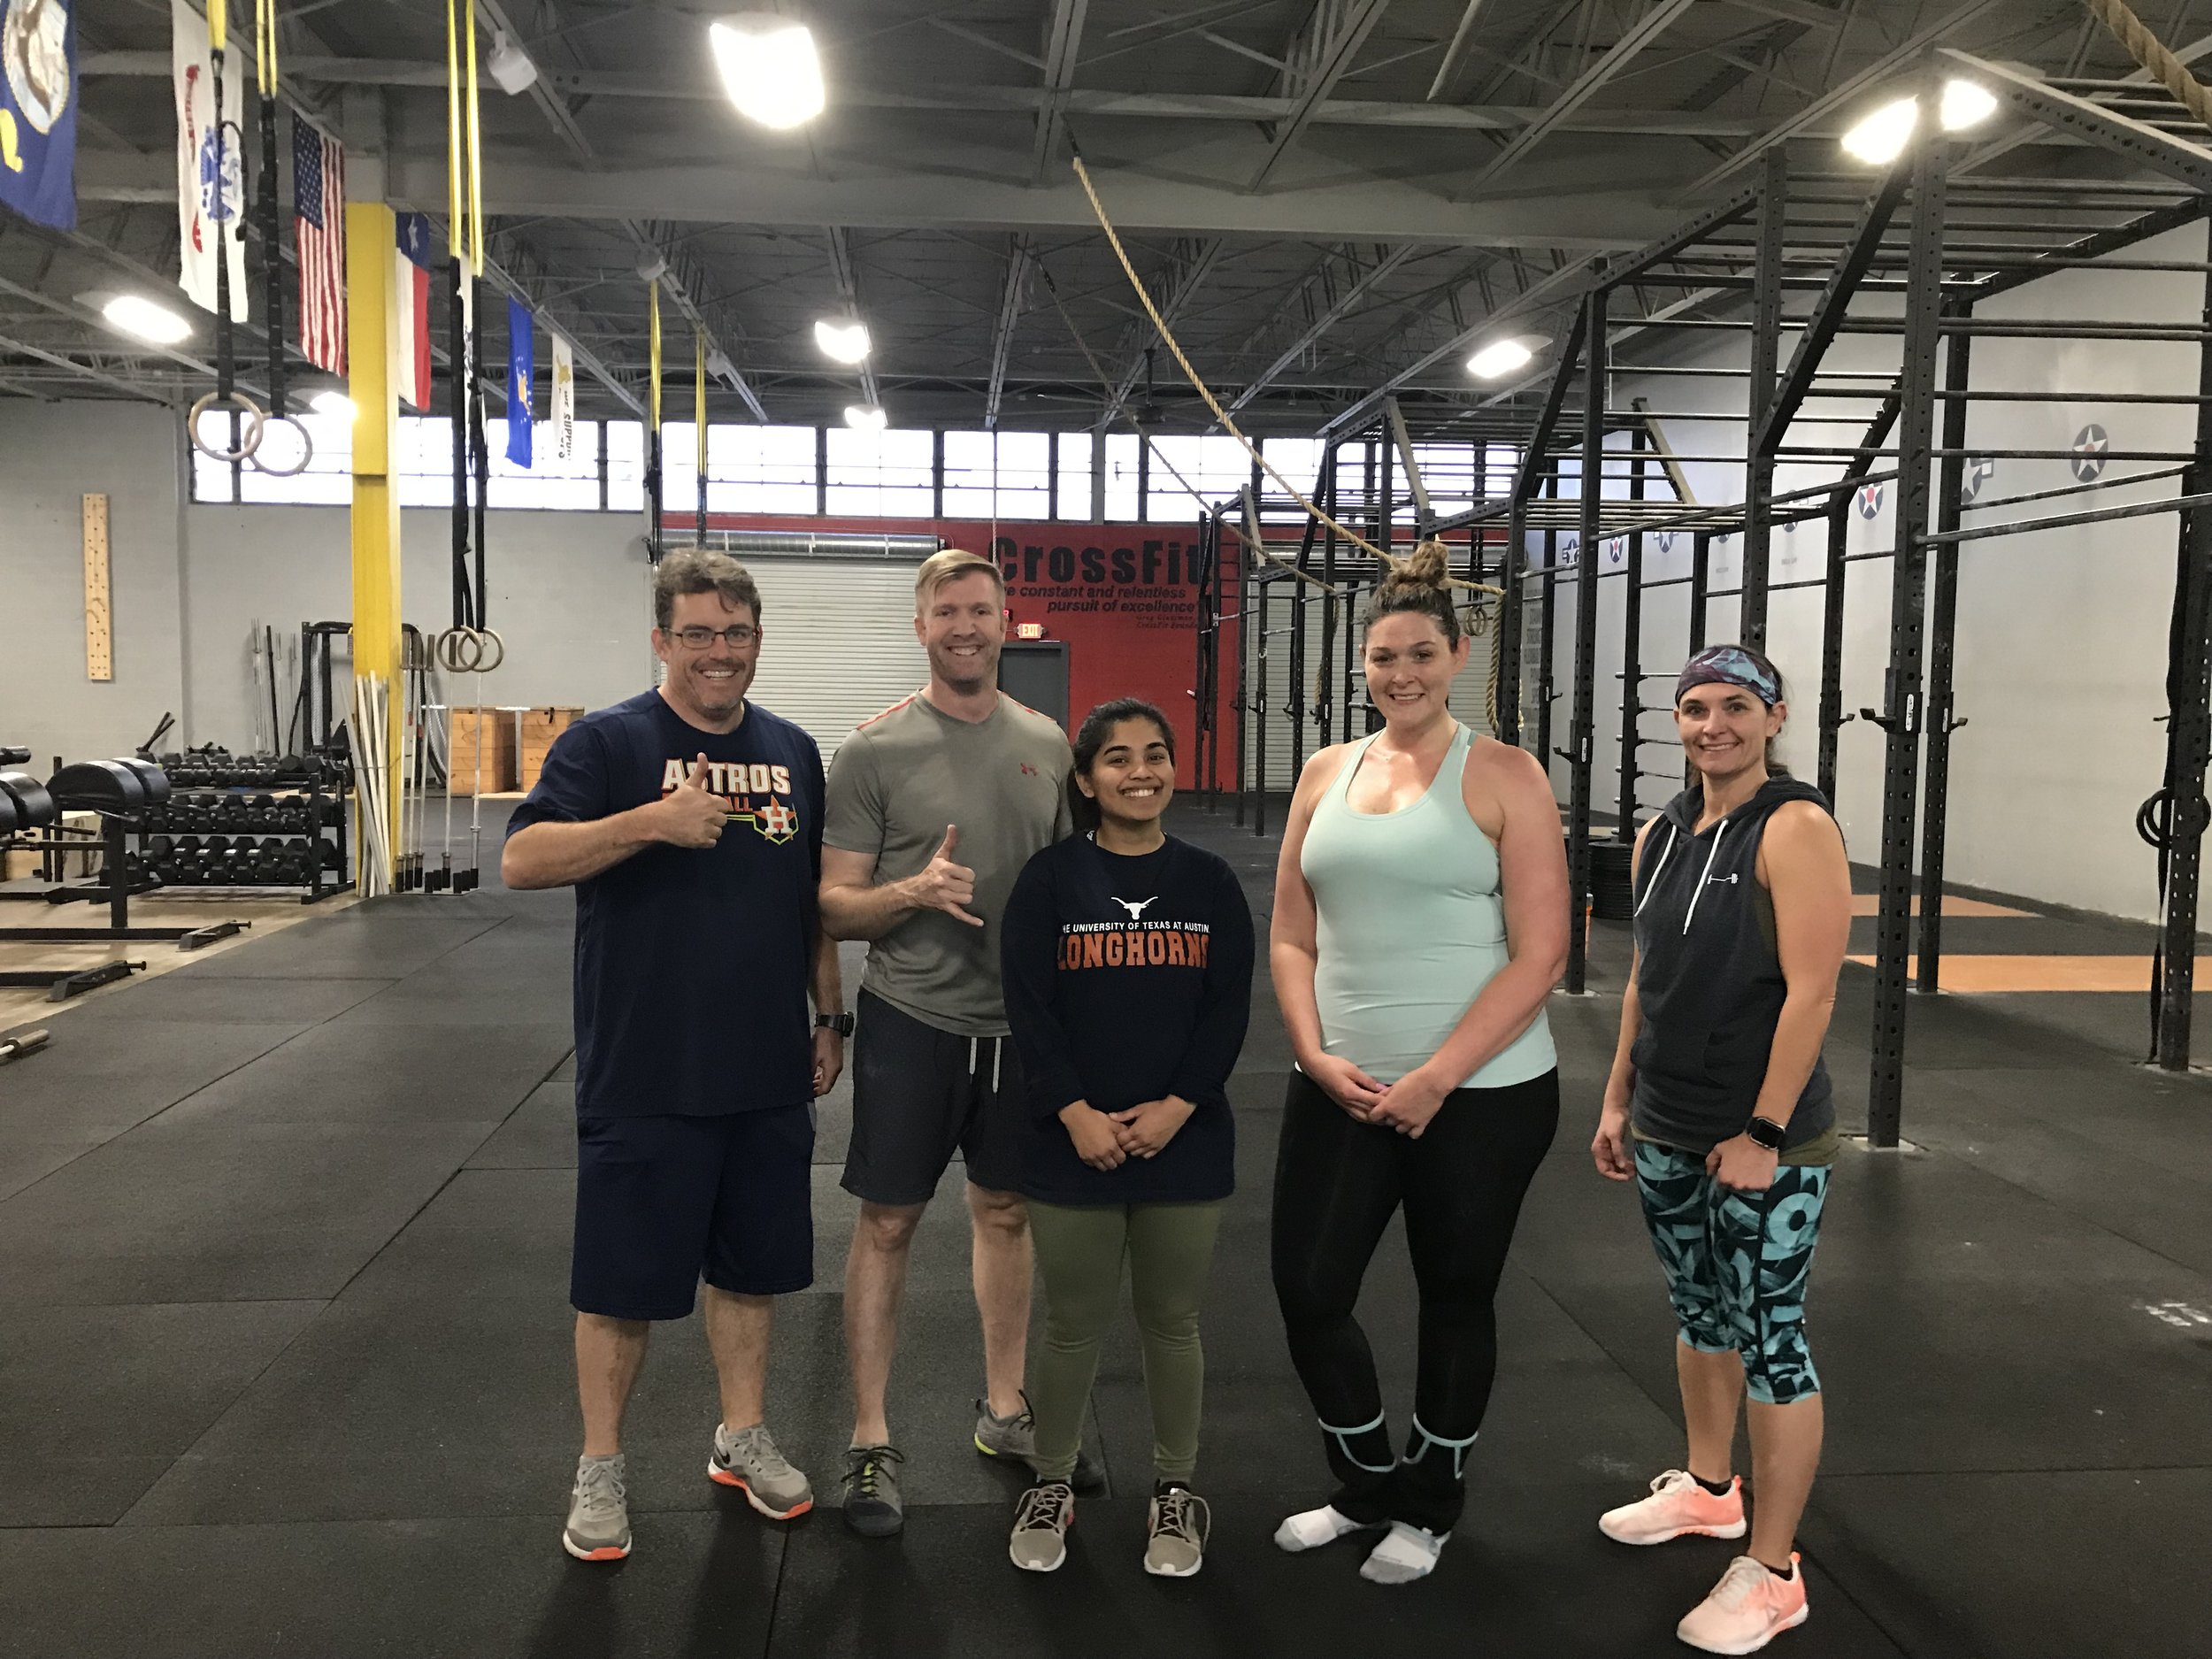 Colin, Zach, Areeba, Danielle and Michelle. Congratulations Areeba on completing your first week of CrossFit!